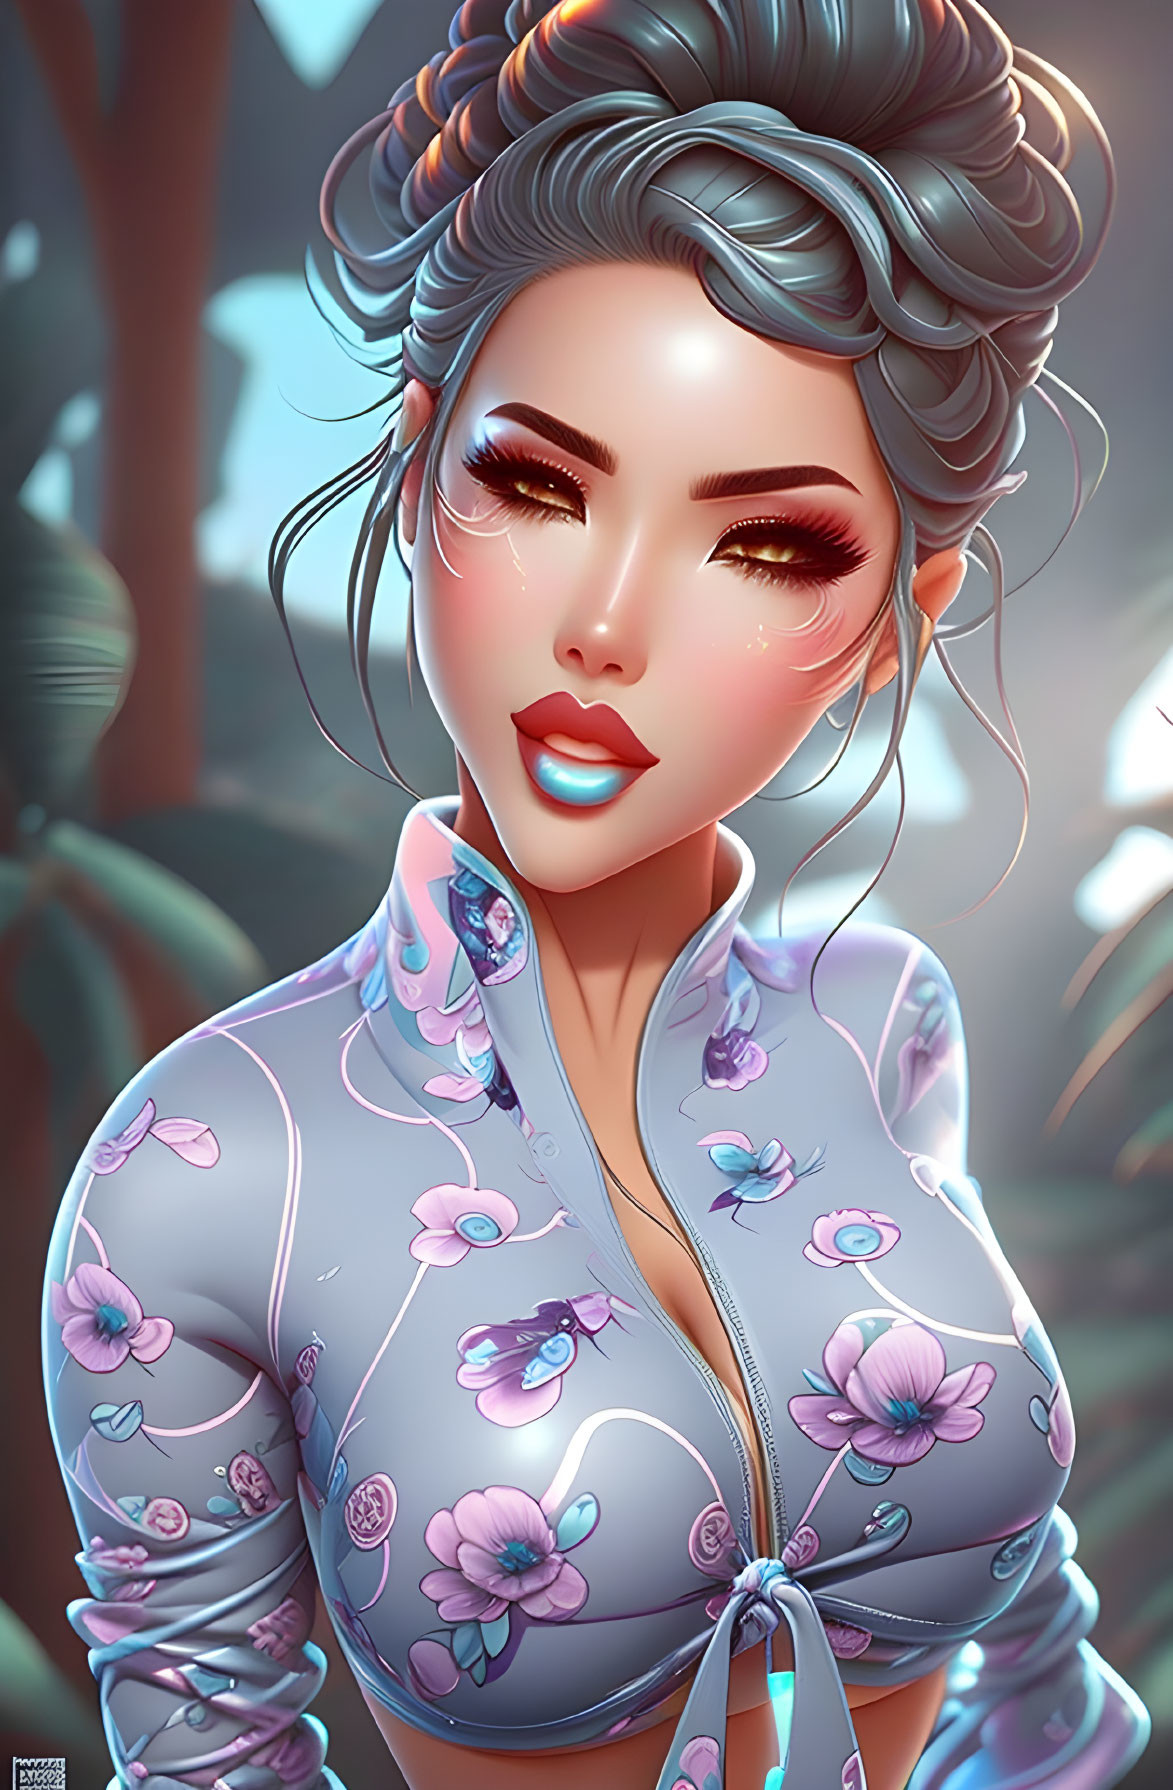 Animated Woman with Stylish Updo and Floral Outfit in Forest Setting